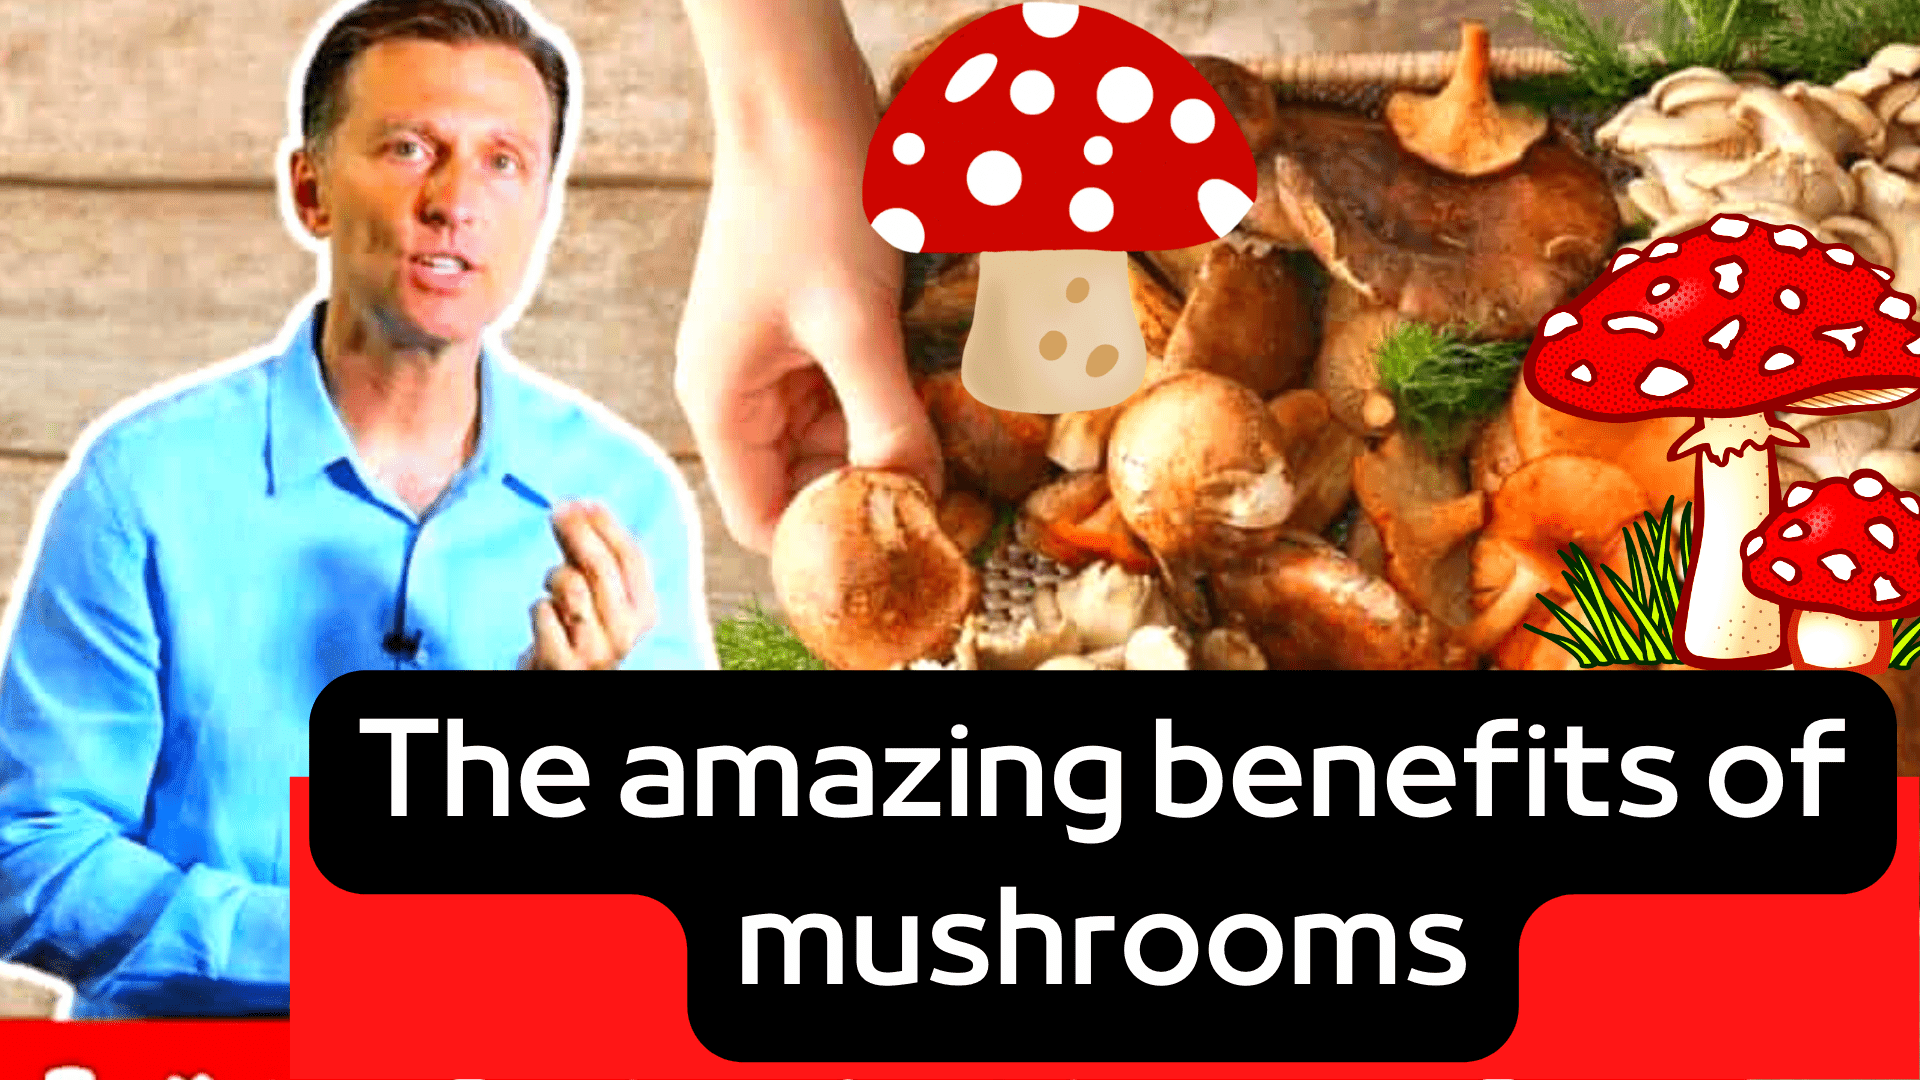 nds of mushrooms to know have amazing therapeutic benefits such as feathery mushrooms!     Mushrooms have long been known to be a fungus.   It may not come to mind that it works for some health problems. However, it has effective effects that may match the effect of certain medicines, which is why it is amazing in treating certain diseases and maintaining our health in general. Here are seven useful mushrooms and their effects on different pathological conditions.